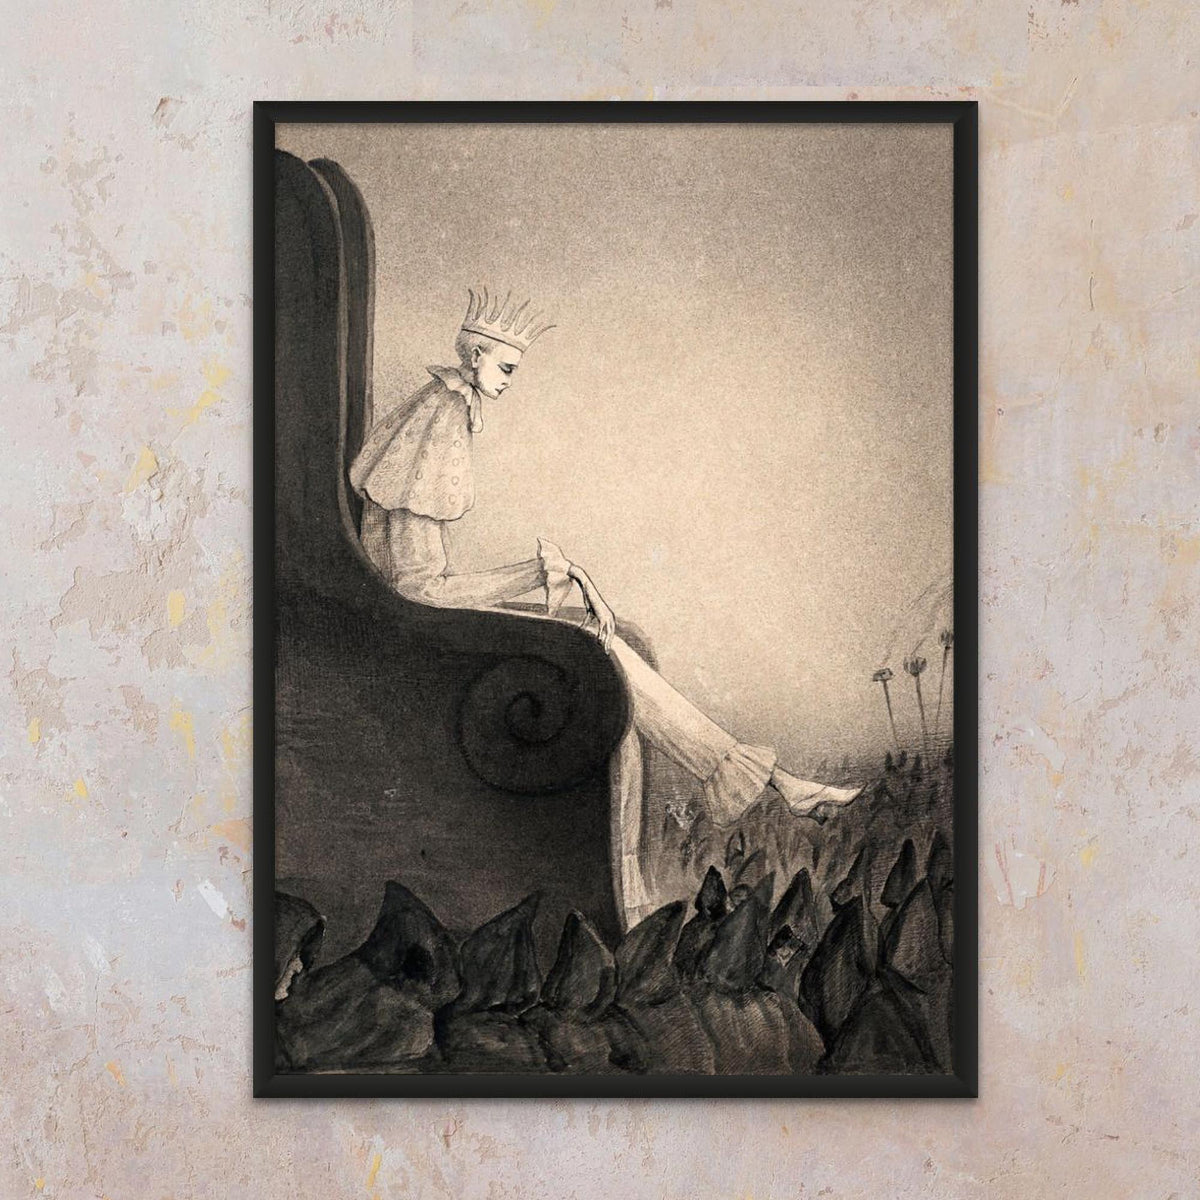 Framed Print 6&quot;x8&quot; / Black Frame Alfred Kubin: The Last King, Symbolist (Anti Capitalist) Surreal Wall Art Antique Gothic Decor Dark Wiccan Pagan Occult Framed Art Print